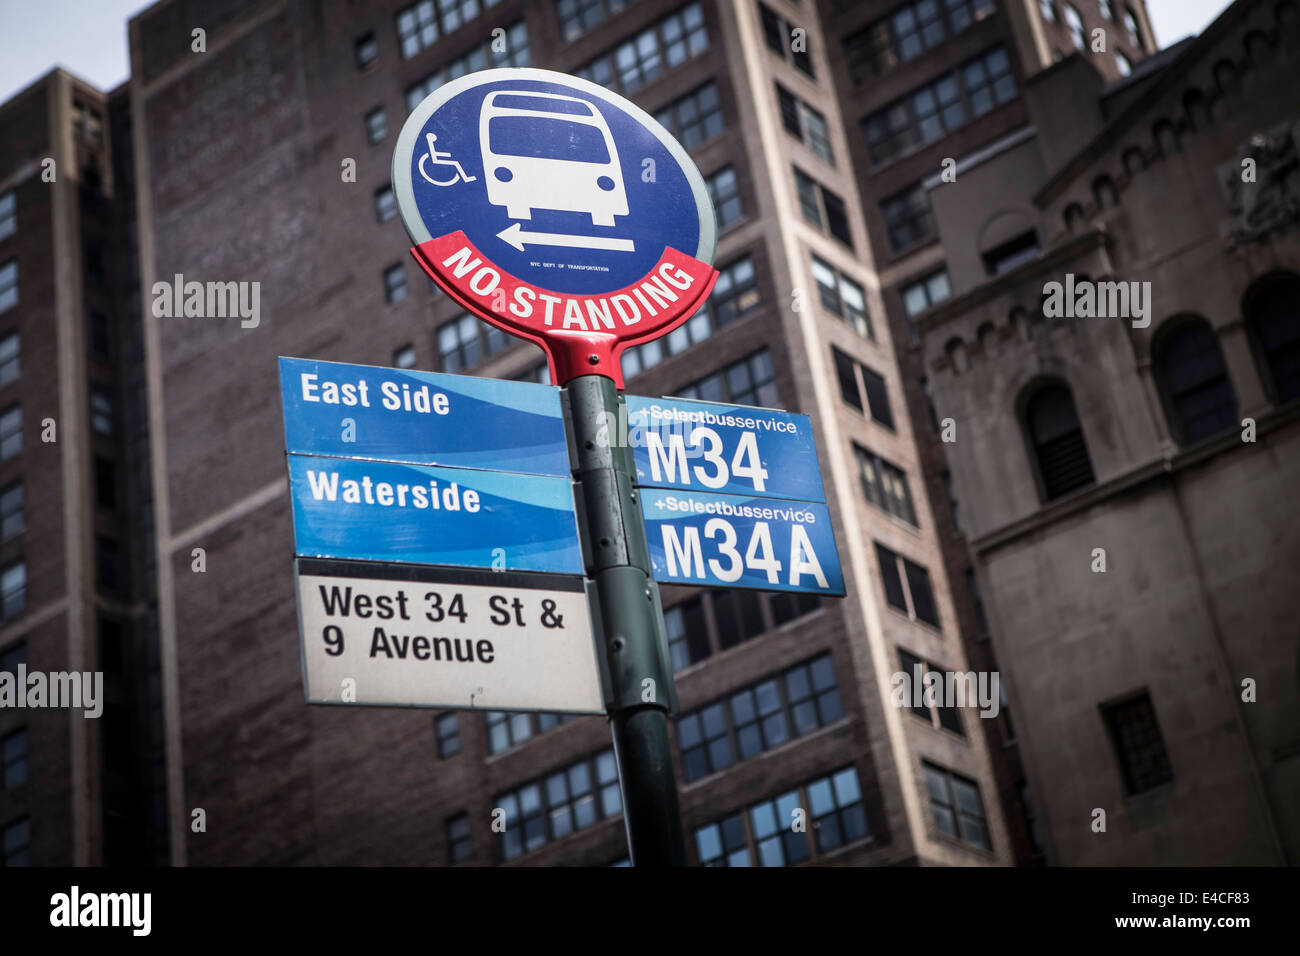 An MTA bus station with service for the M34 and M34A bus routes is pictured in the New York City borough of Manhattan, NY Stock Photo